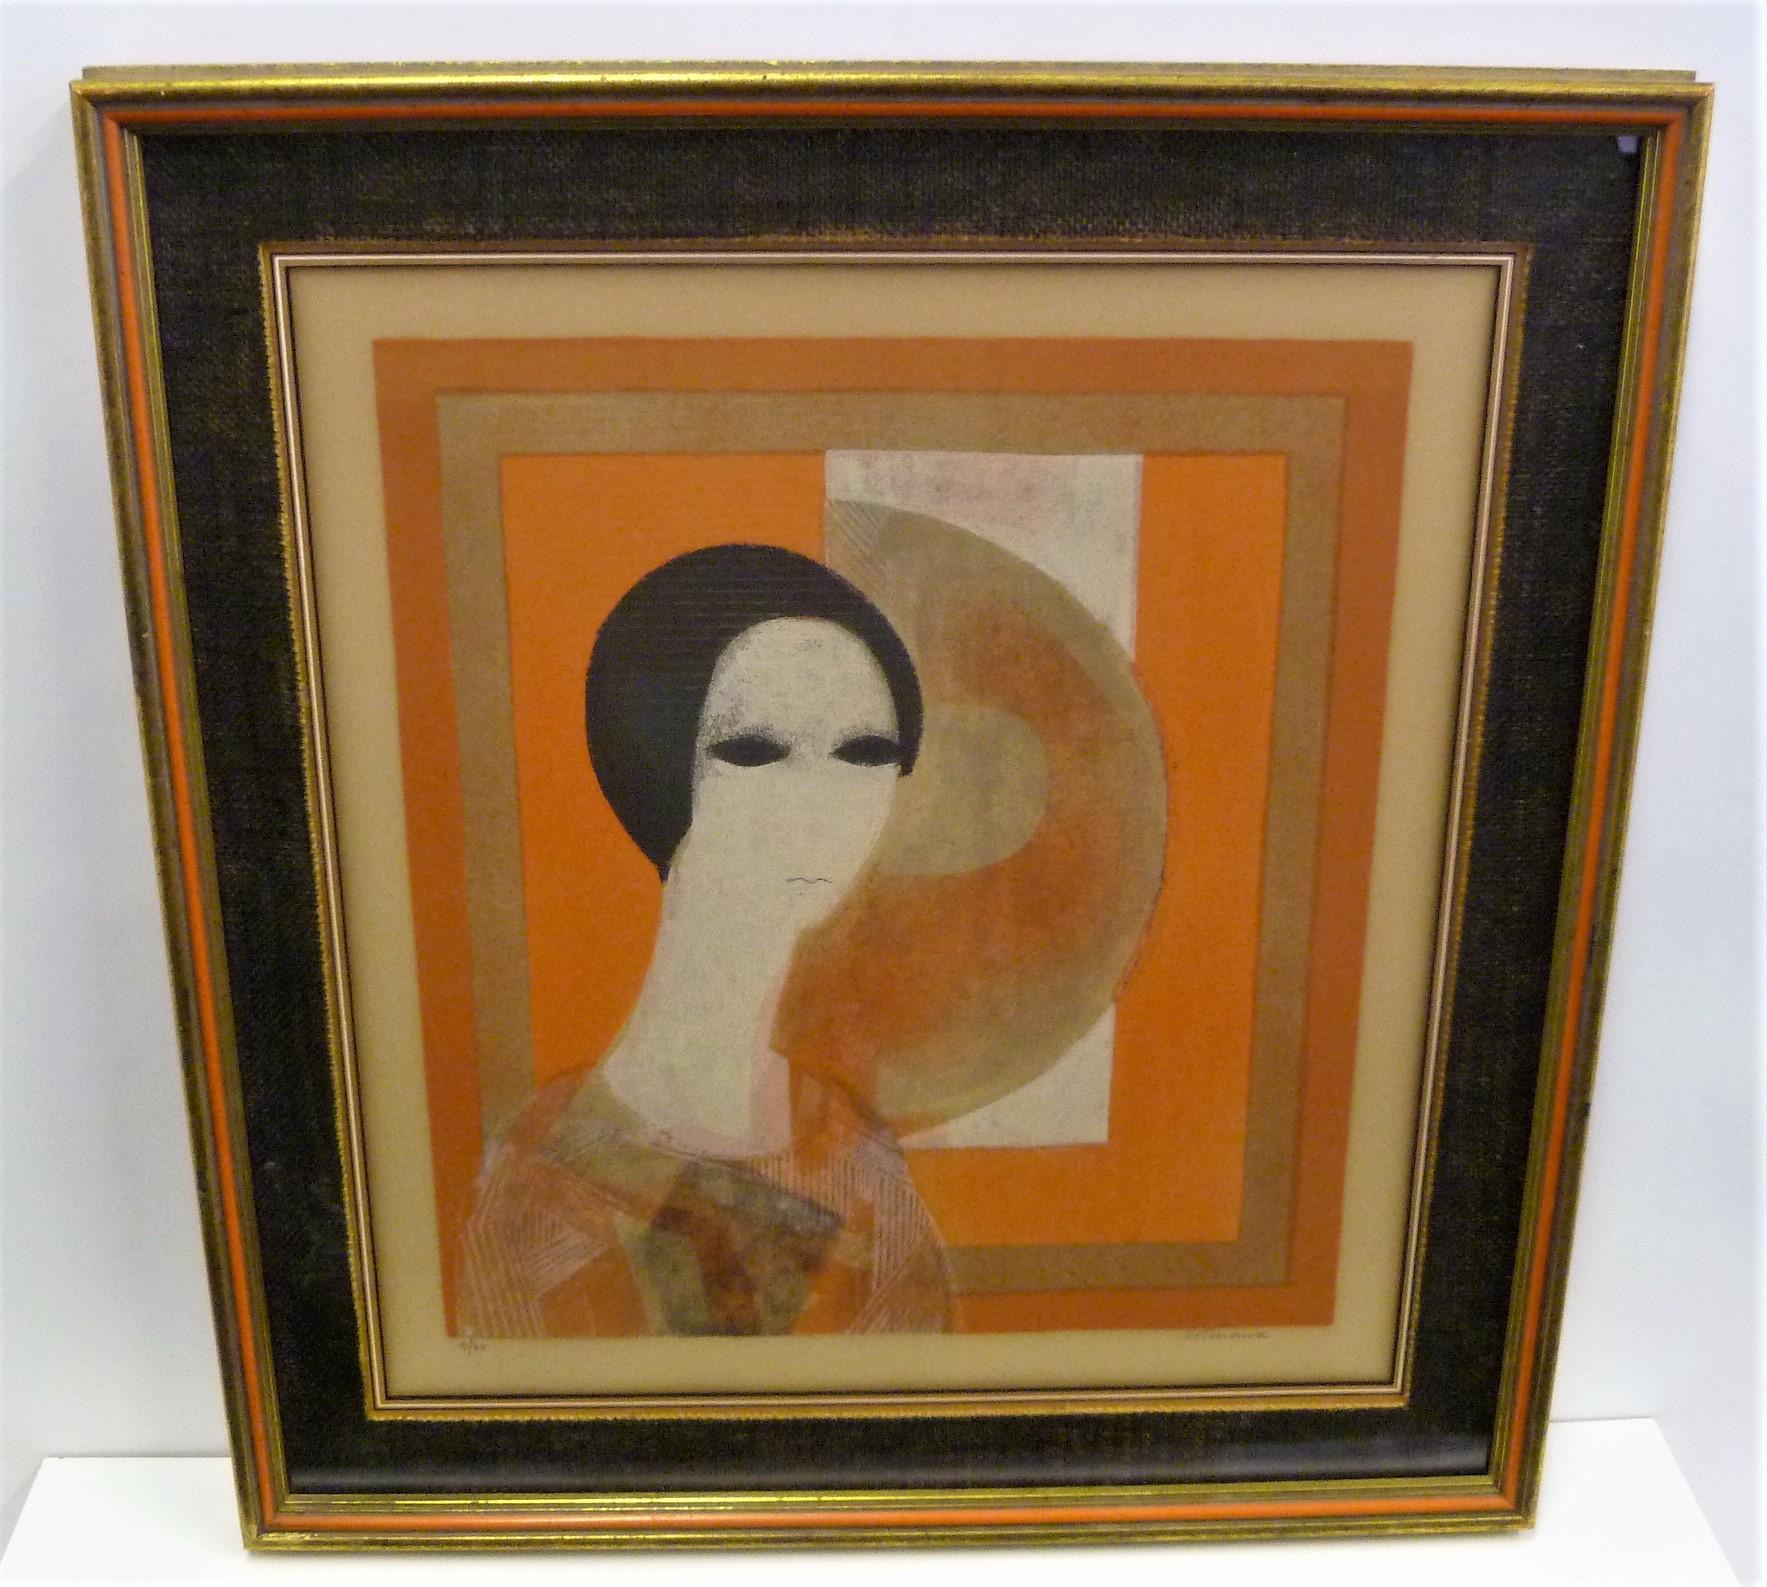 André Minaux (1923-1986) French social realist painter - lithograph signed in pencil Minaux lower right and numbered 9/60 lower left, in original frame. Beautiful lithograph of Modigliani/Brancuso style representation of a woman, typical for